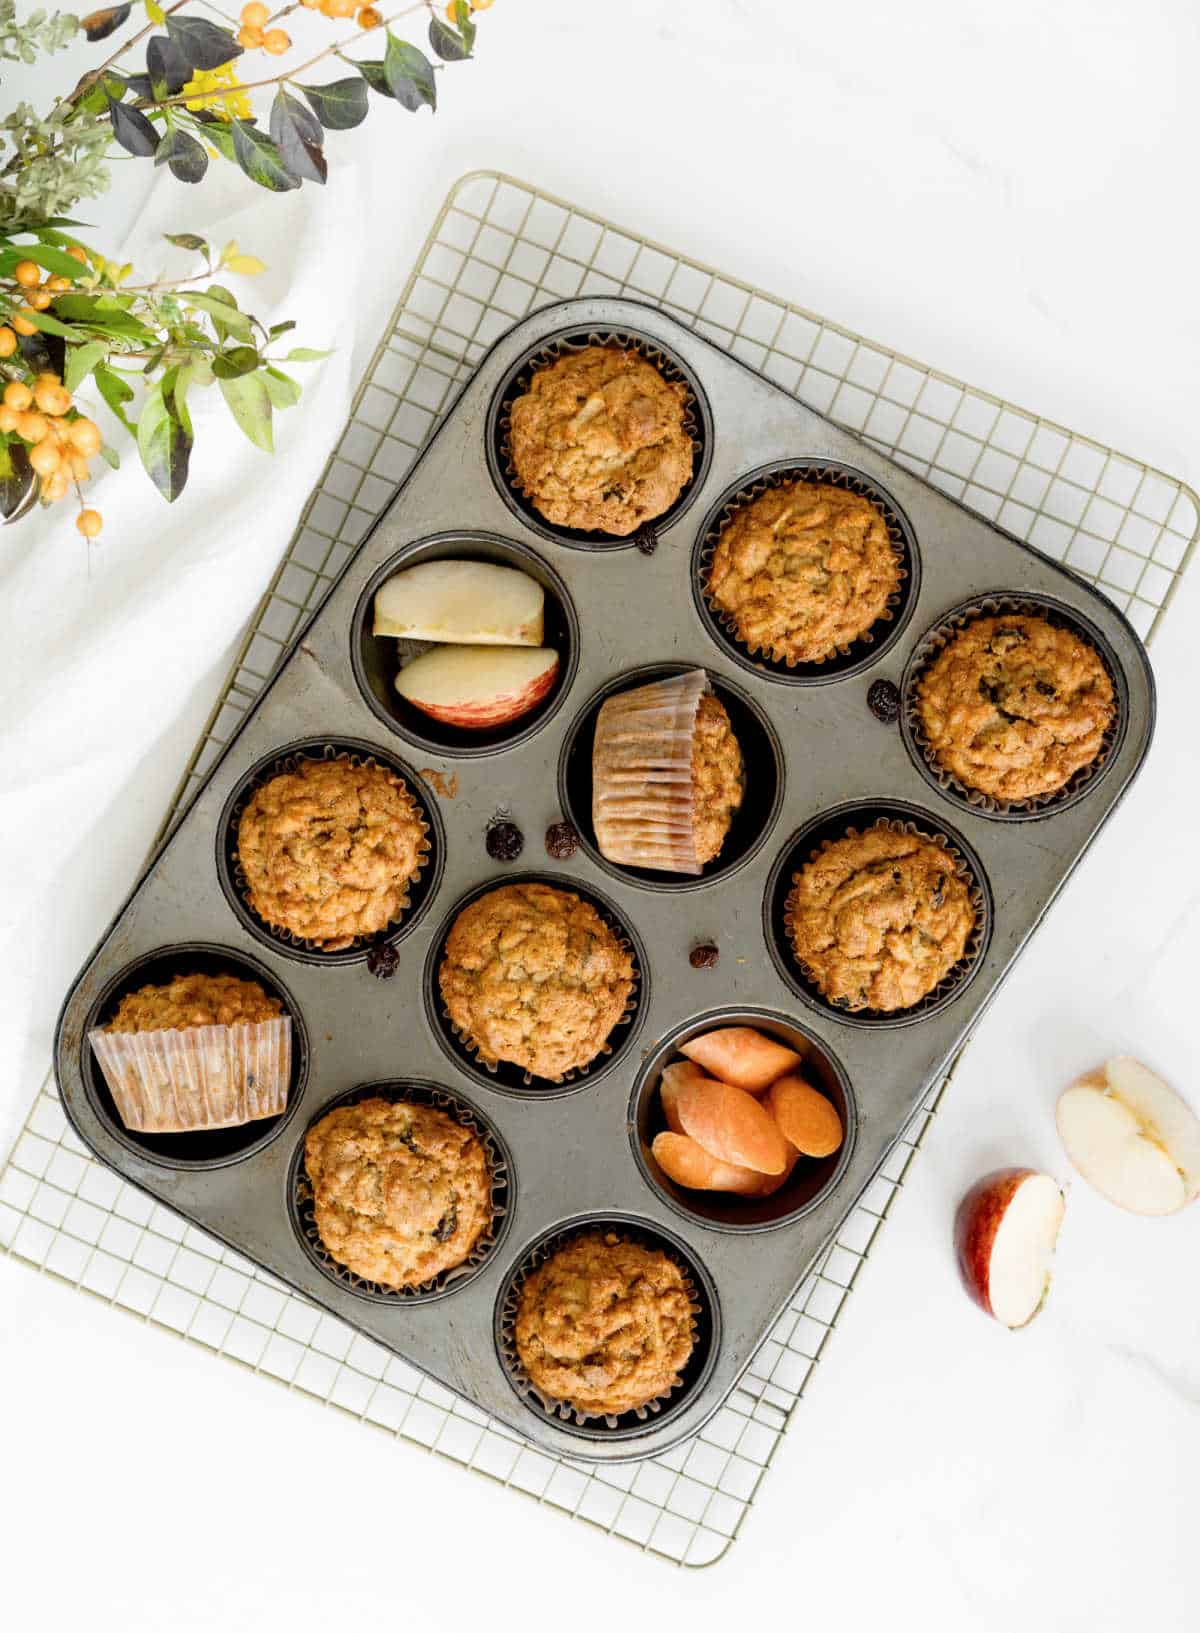 Top view of muffin pan on a wire rack with baked muffins, carrot and apple slices. White marble surface. 